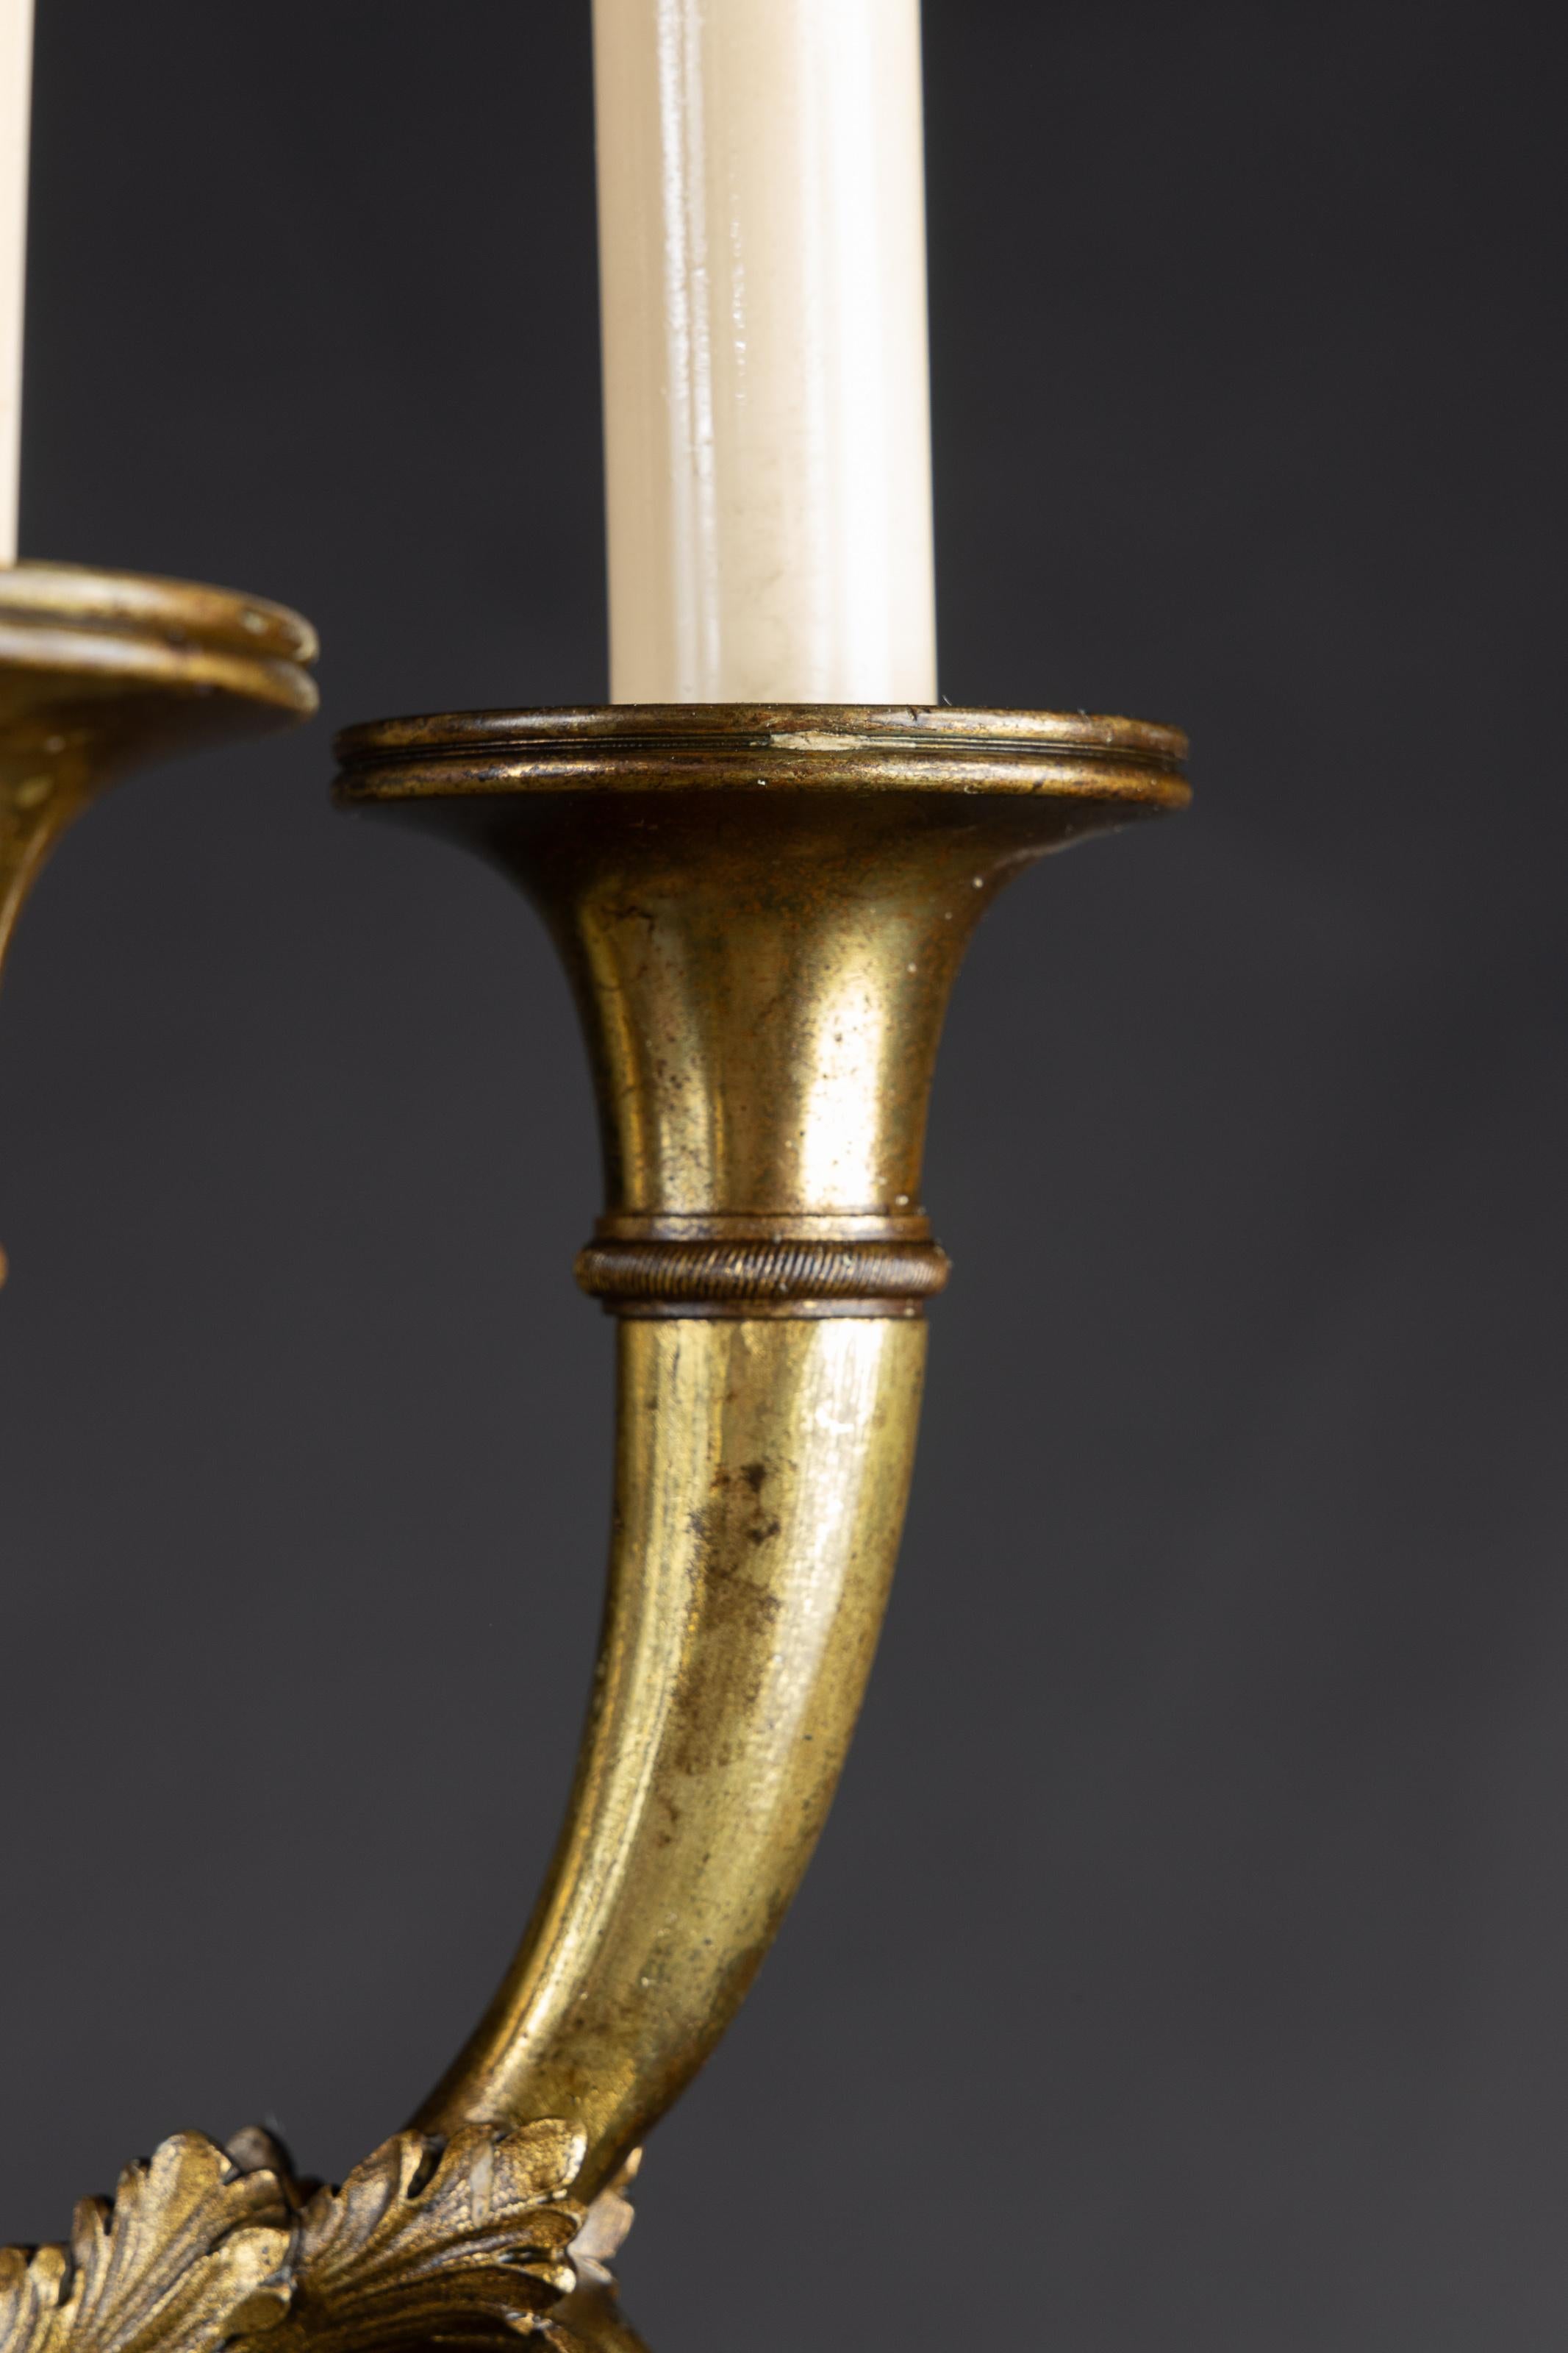 This pair of French Empire sconces are made of bronze and date back to the 19th century. The pair features a beautiful large torch back-plate with a floriate design at bottom, as well as horn-shaped bobeches. Each arm is adorned with acanthus